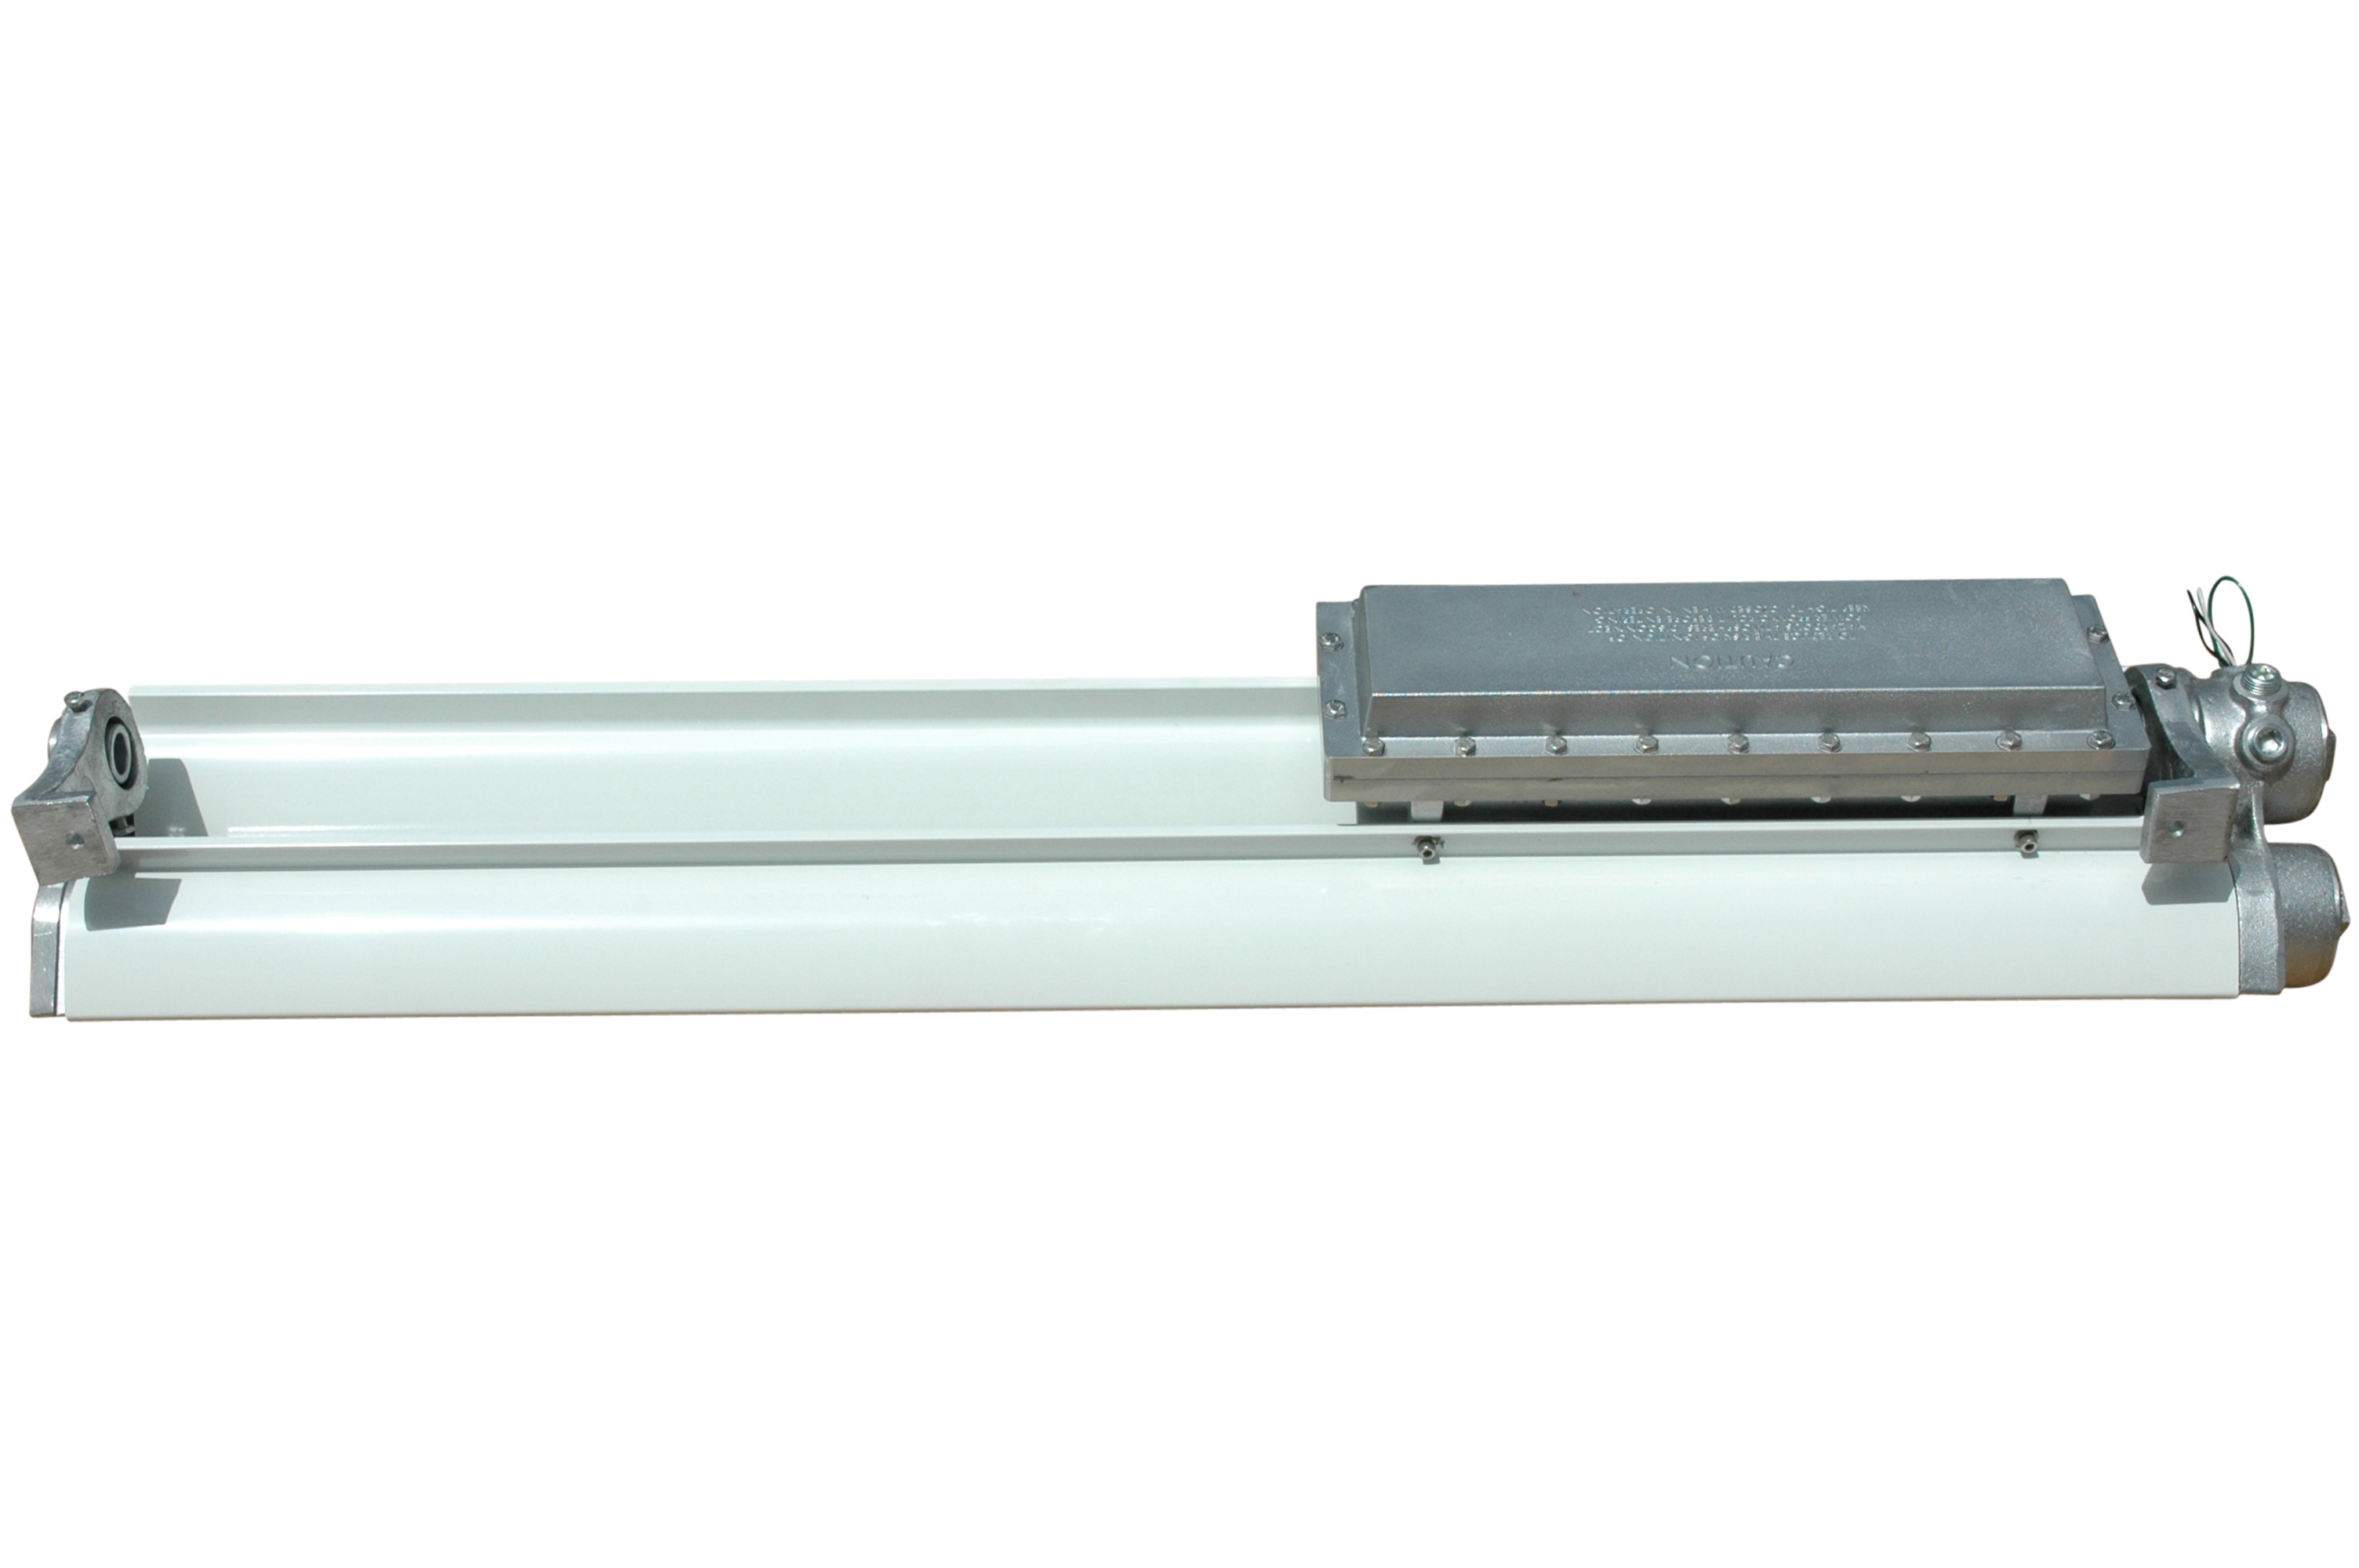 Class 1 Division 1 LED Light Fixture that powers on only during outages